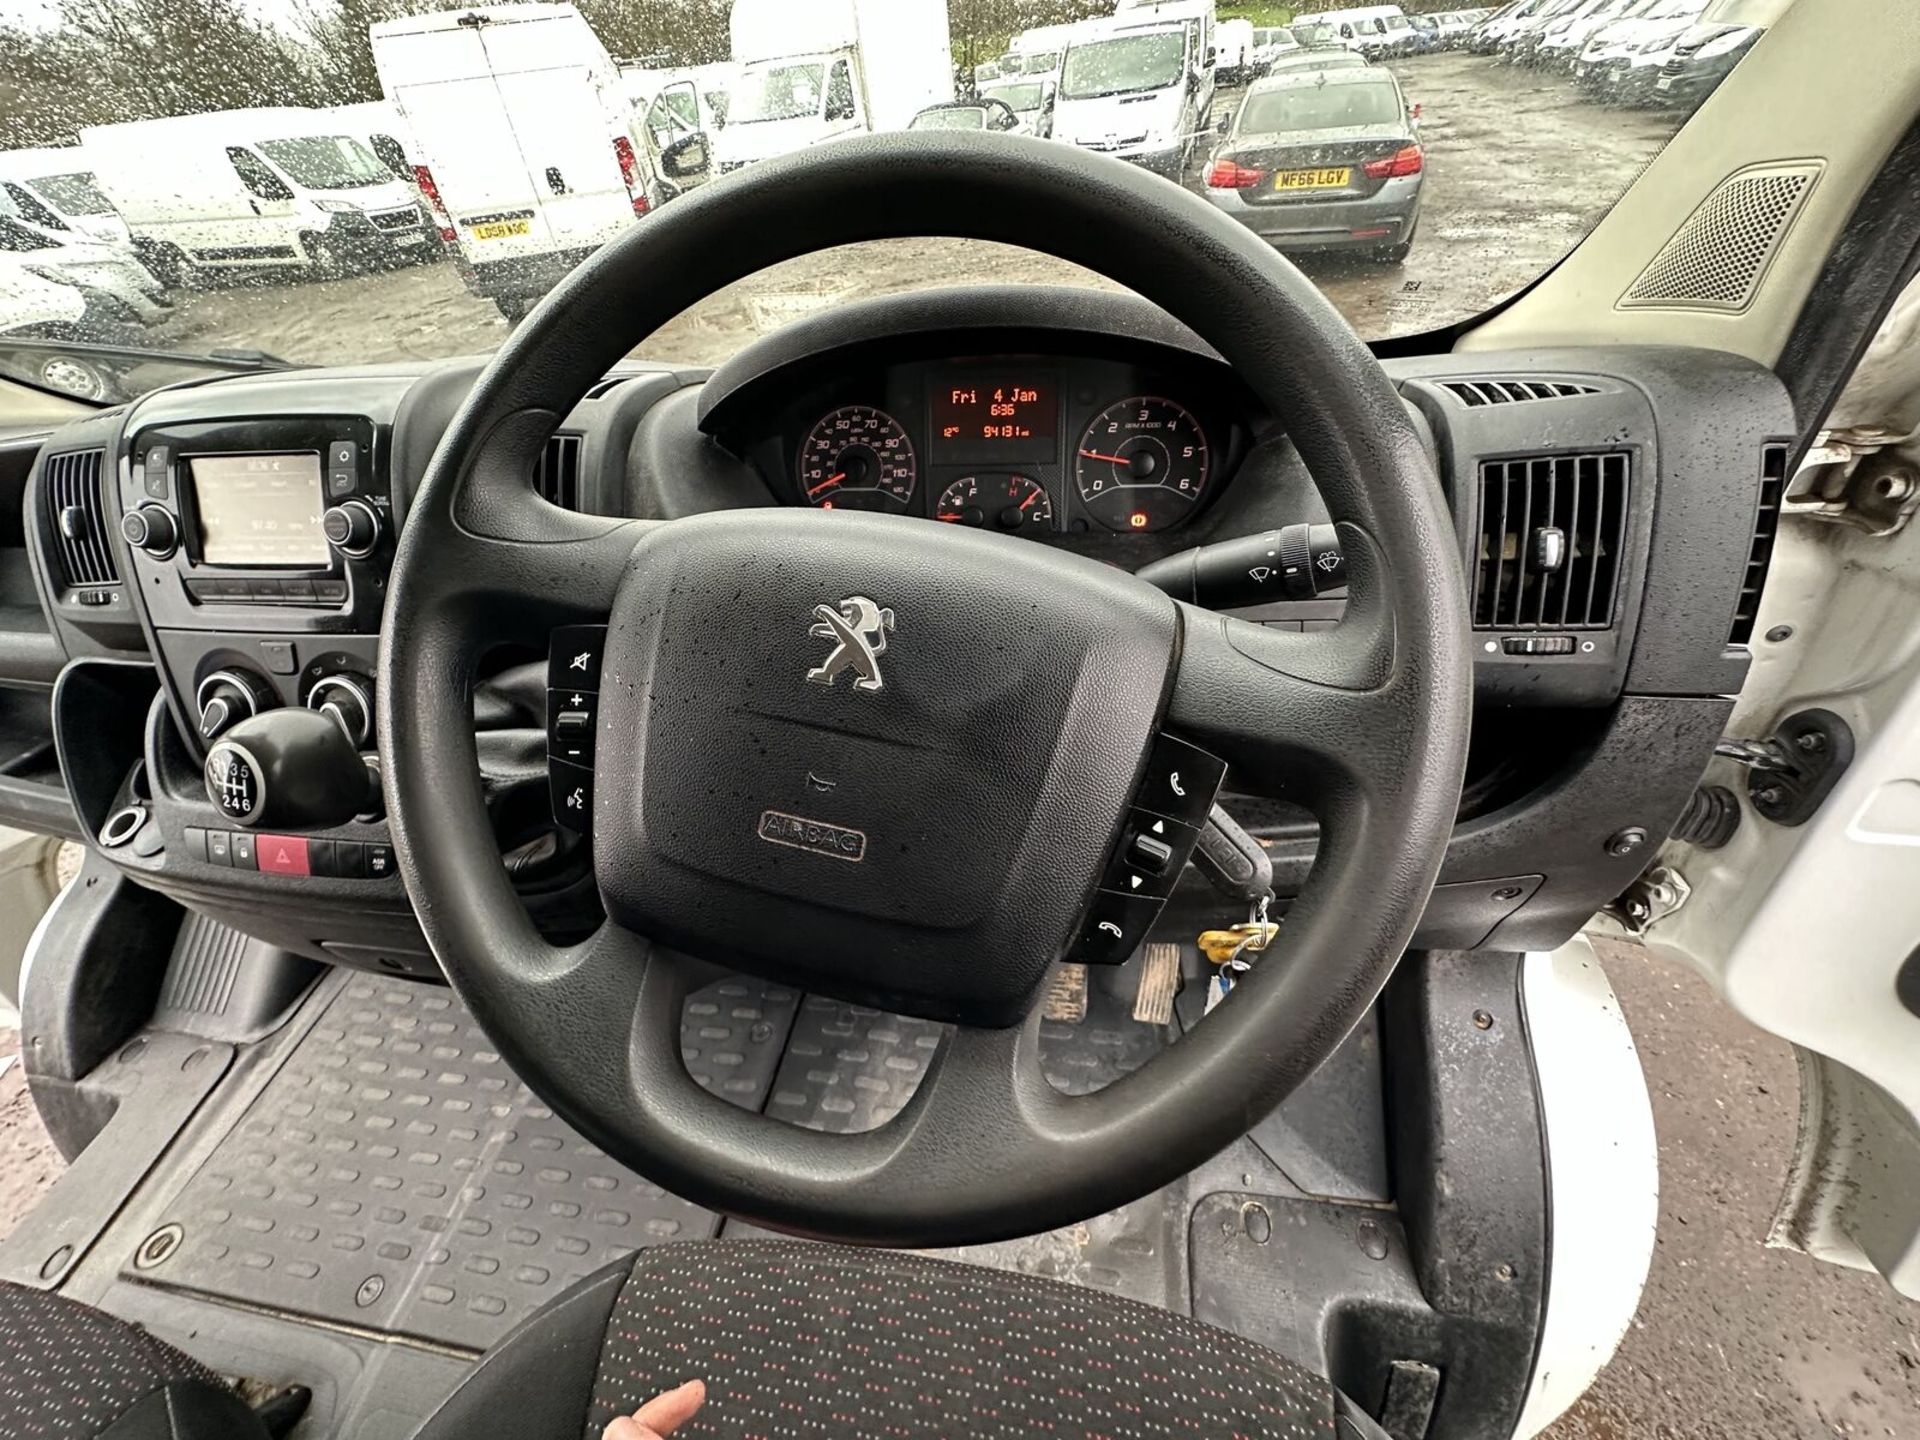 69 PLATE PEUGEOT BOXER: BLUE HDI POWER, READY FOR DUTY - Image 19 of 19